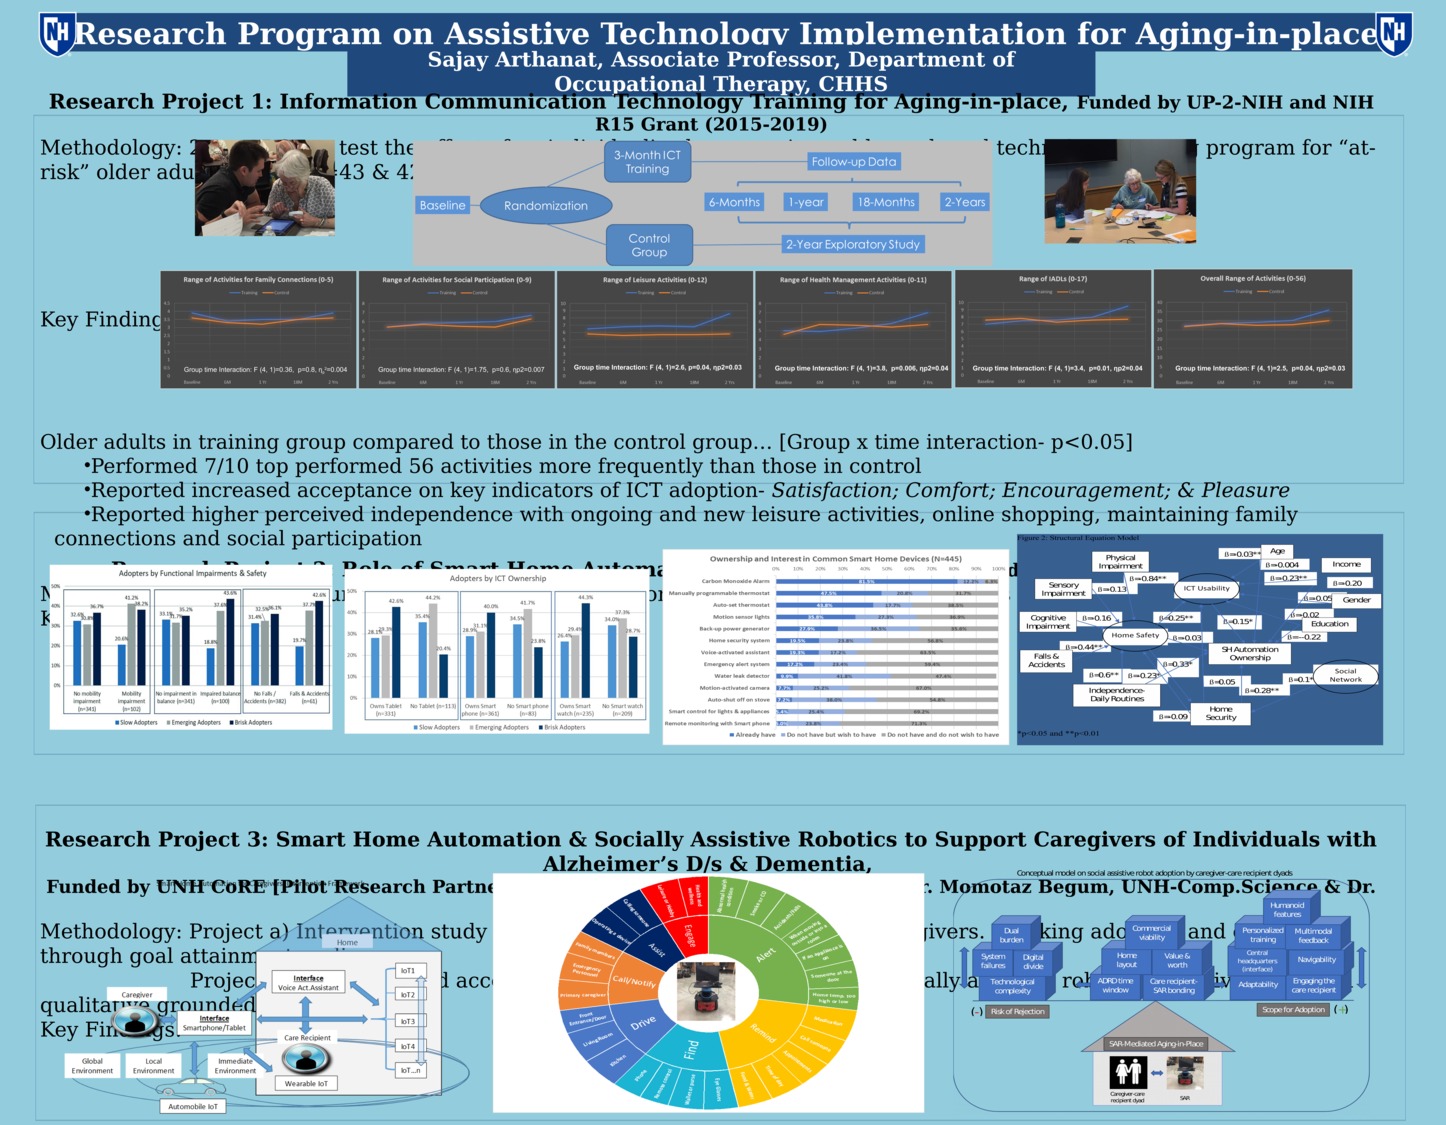 Research Program On Assistive Technology Implementation For Aging In Place by sdq24